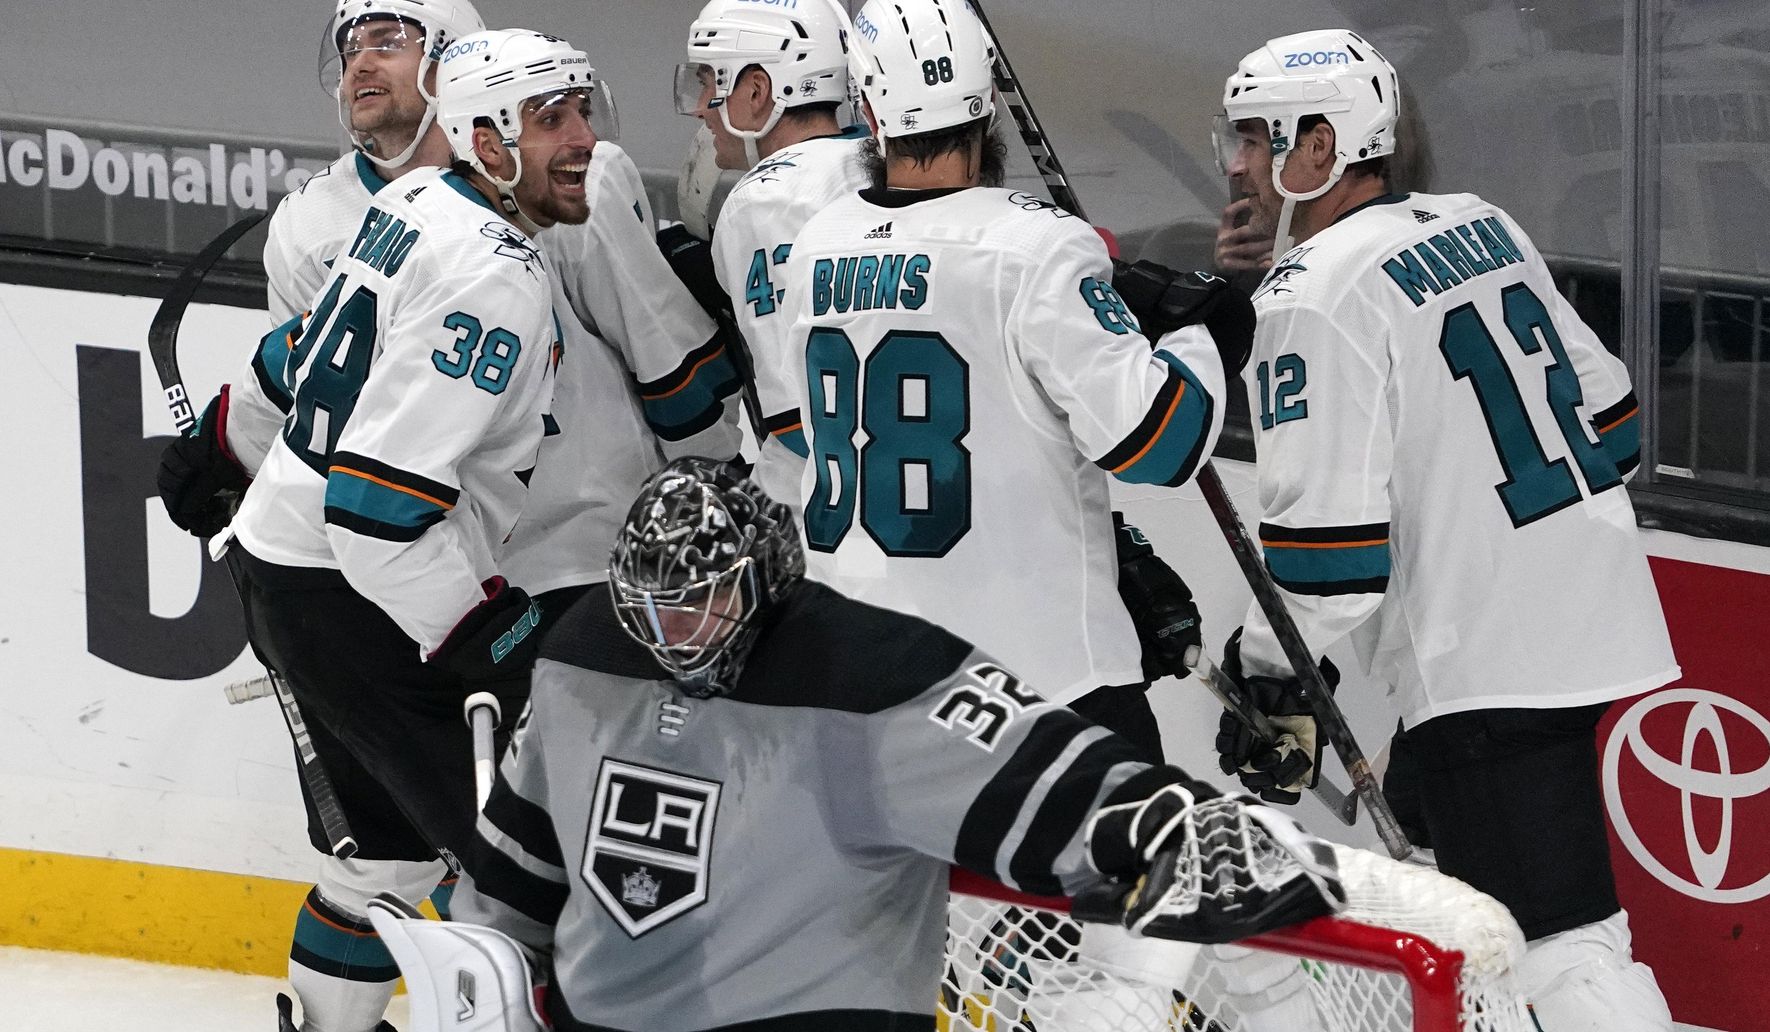 Gambrell scores as Sharks beat Kings for 4th straight win